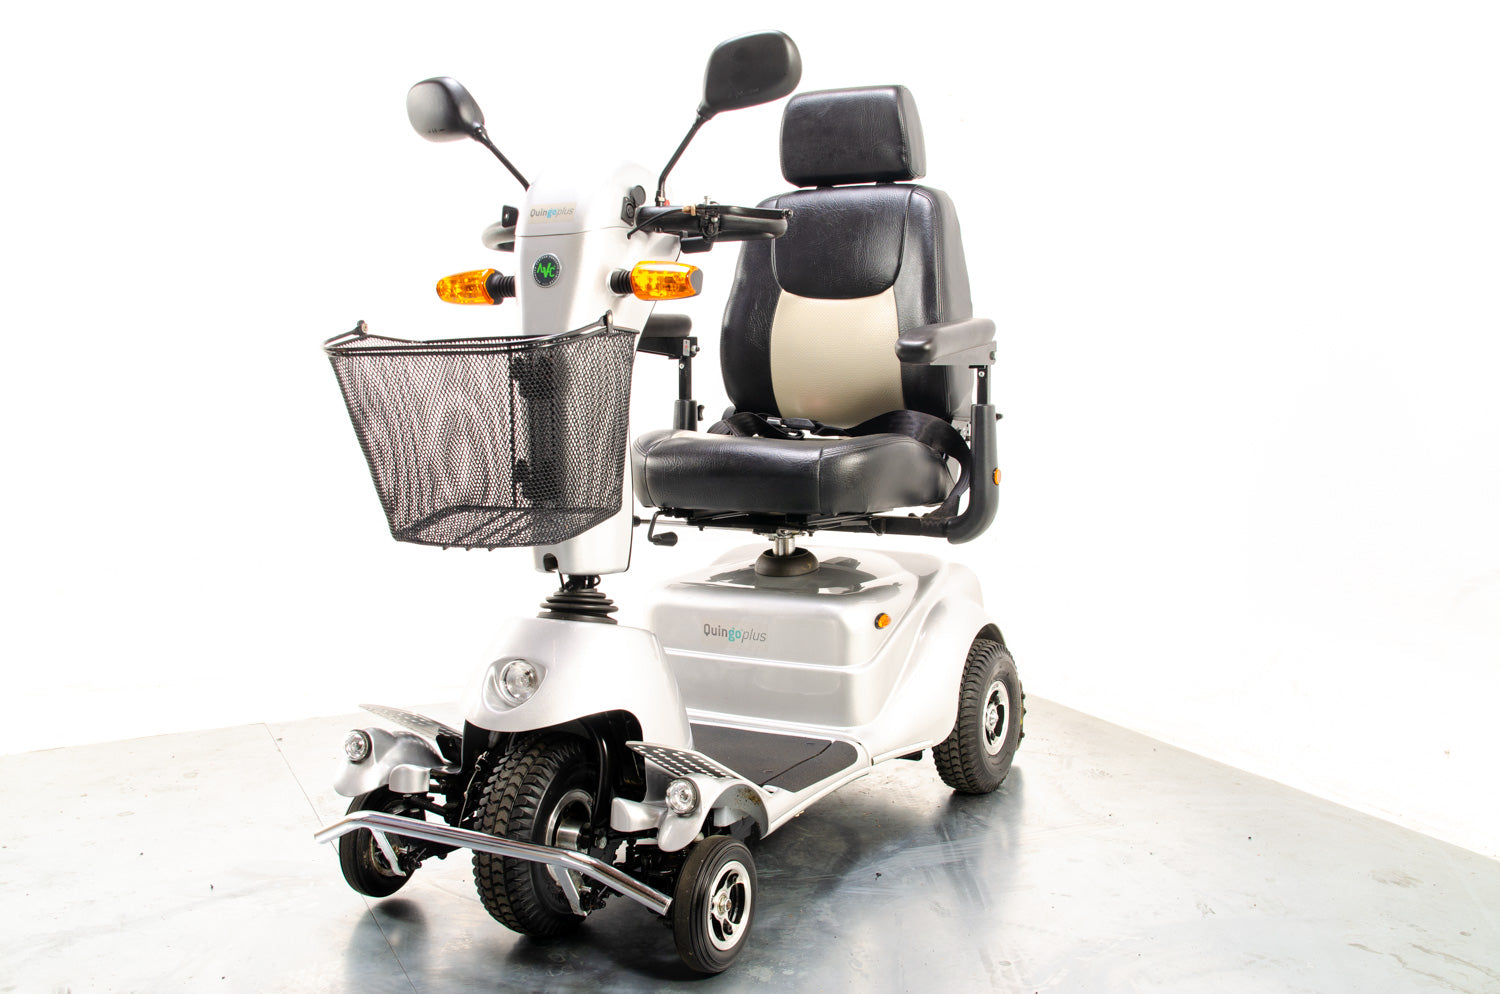 AVC Quingo Plus 8mph Used Mobility Scooter 5 Wheels Road Pavement Turning Circle Silver